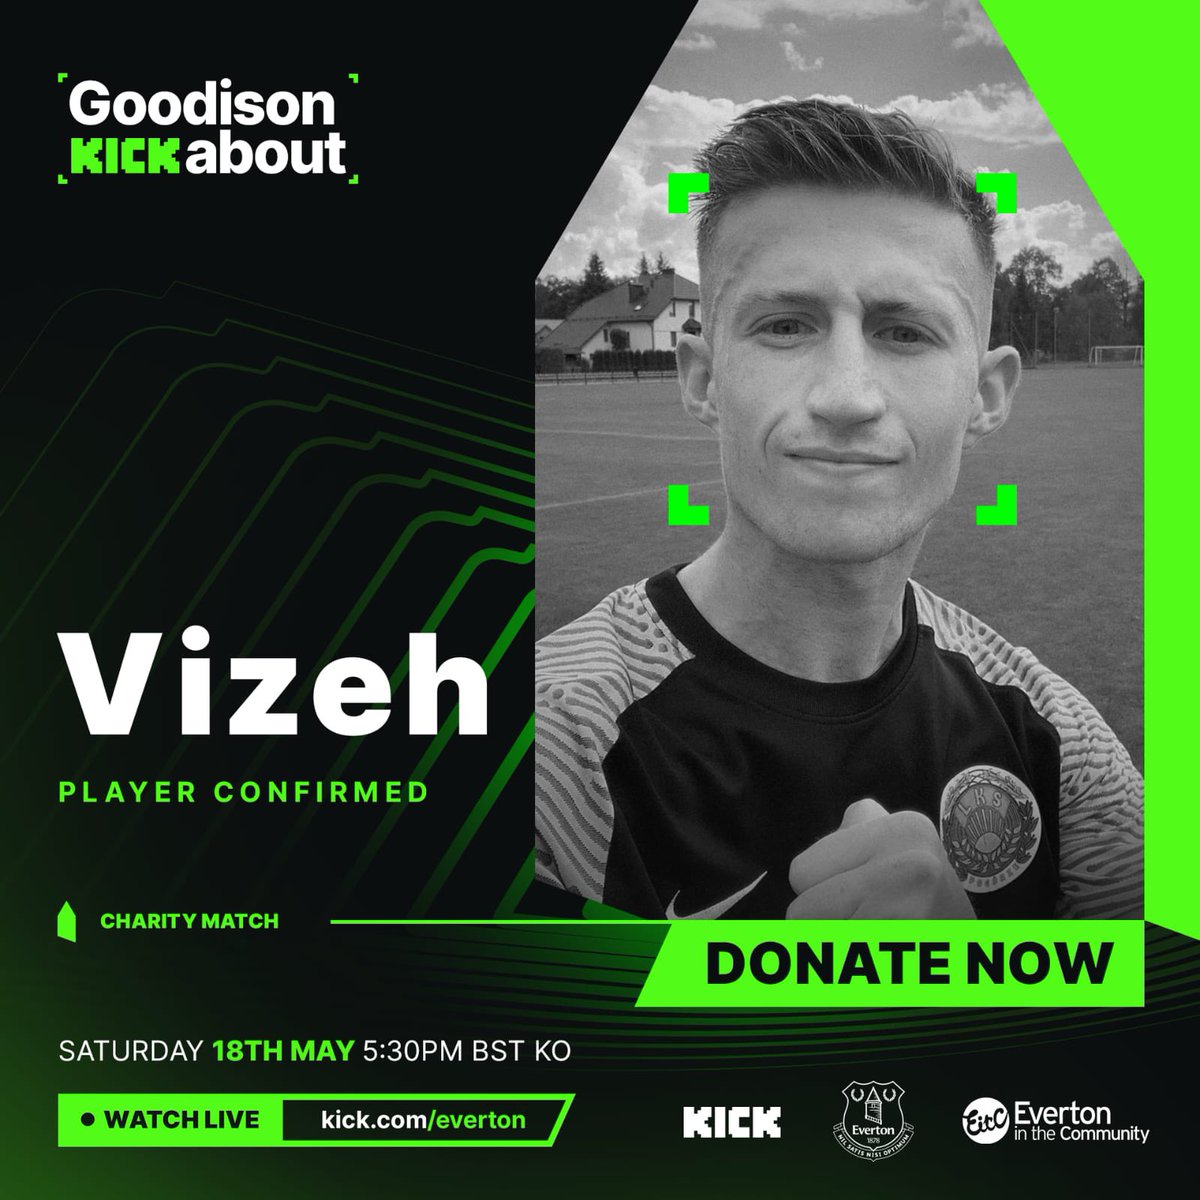 🏟️CHARITY EVENT🏟️

Honored to announce that I’m playing in #GoodisonKickabout on Saturday 18th May! 🔵

A charity football event at Goodison Park to help raise money for the fantastic @Eitc 

➡️Donate Here evertoninthecommunity.org/donate/

📸Watch live at 5:30pm on kick.com/everton